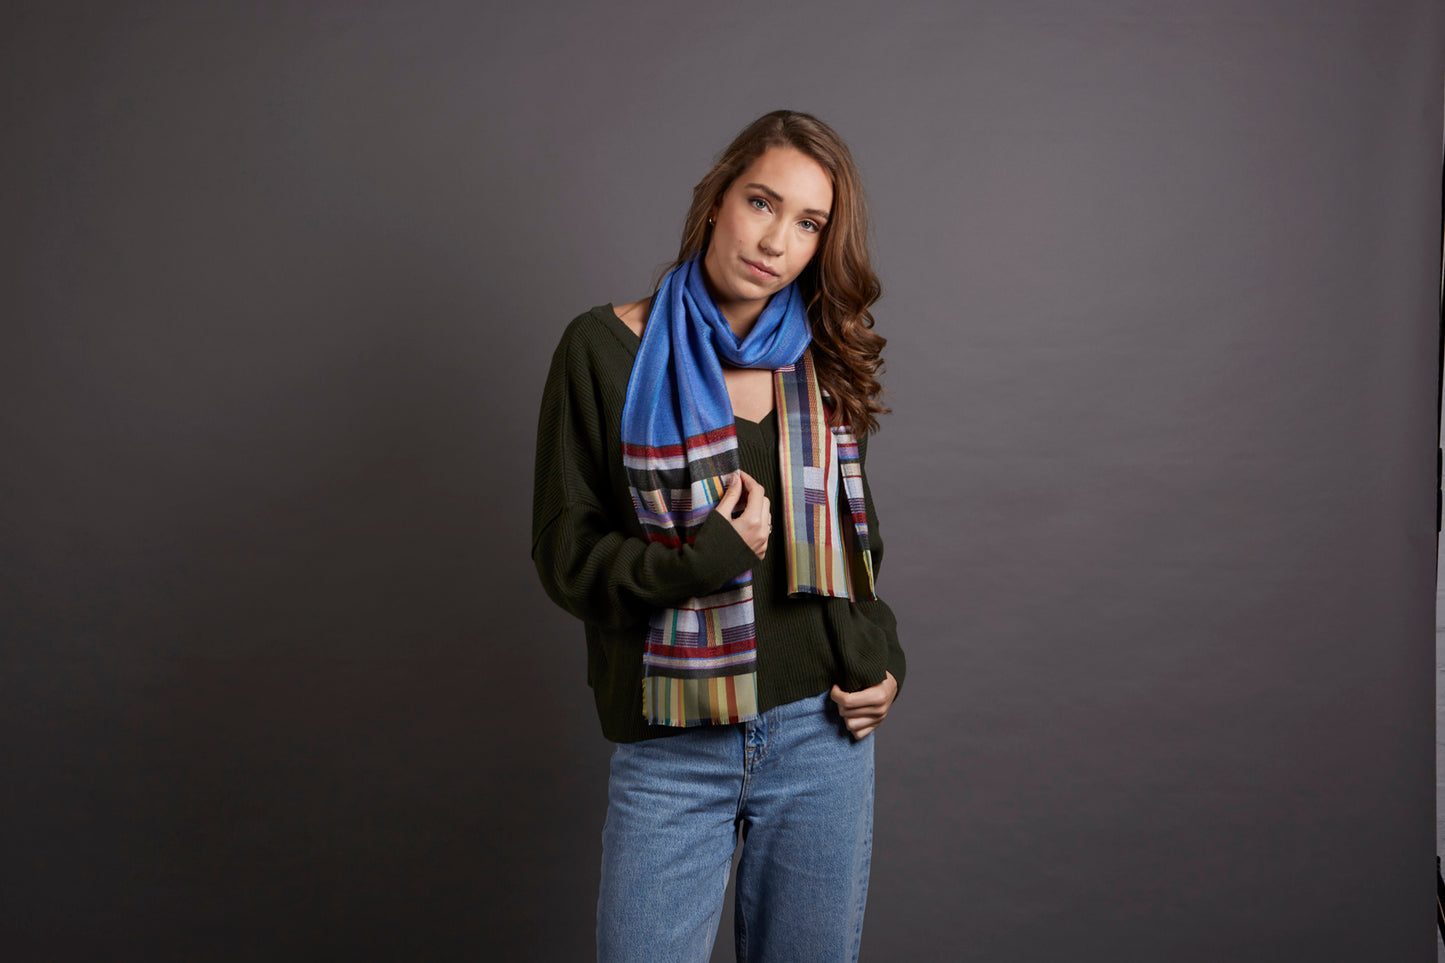 WALLACE+SEWELL - SILK+LAMBSWOOL SCARF - MARCELINE - COBALT